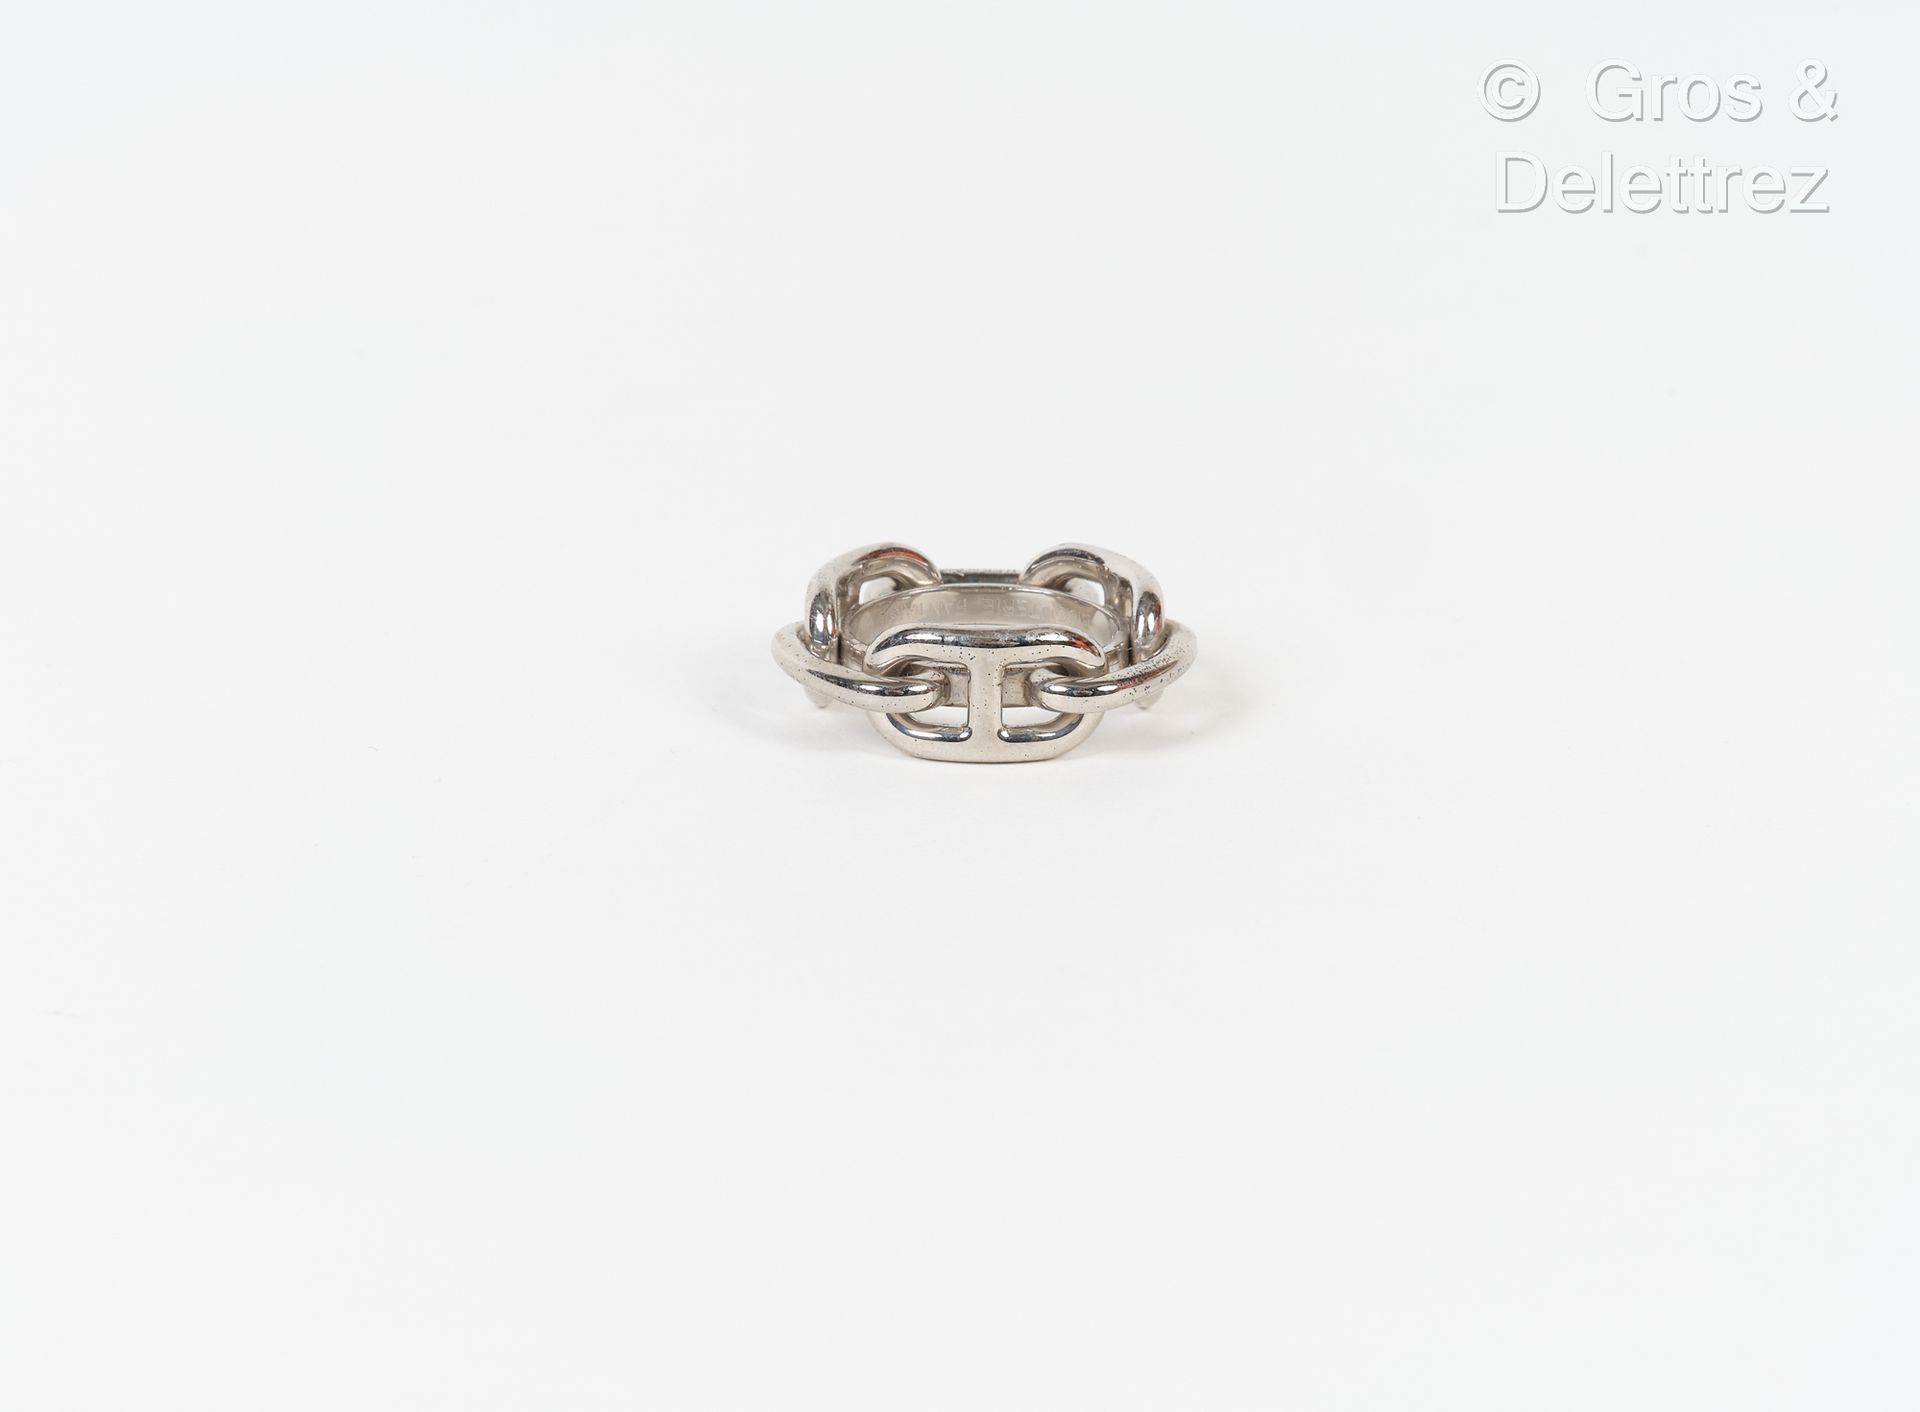 Null HERMES Paris - "Chaîne d'Ancre" scarf ring in silver plated metal.